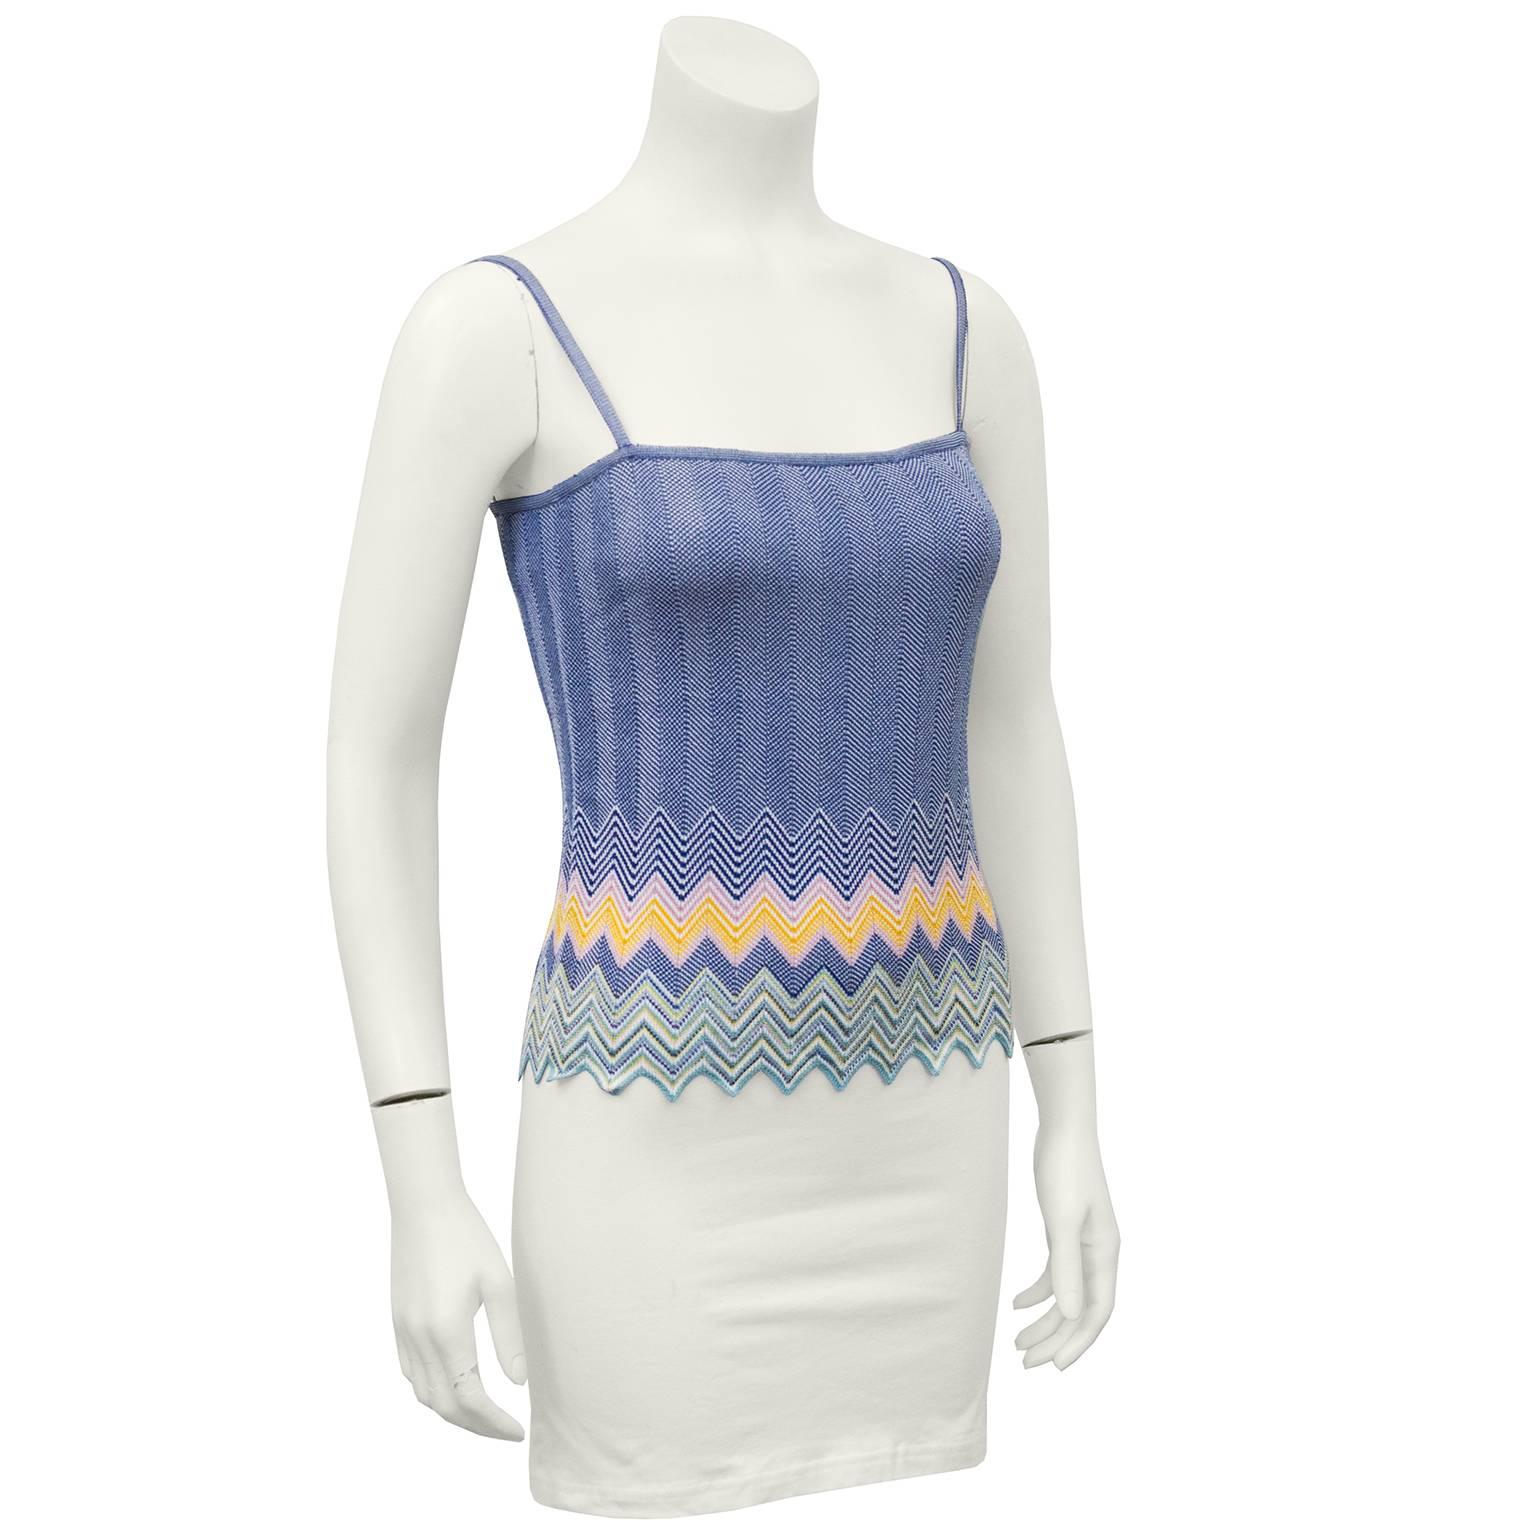 Slinky and sexy Missoni tank top from the 2000's. Periwinkle blue knit with pink, white, yellow and green chevron detailing at bottom. Perfect for vacation. Iconic Missoni fabric. Excellent vintage condition. Fits like a US 0-2/IT 40. 

Bust 28”